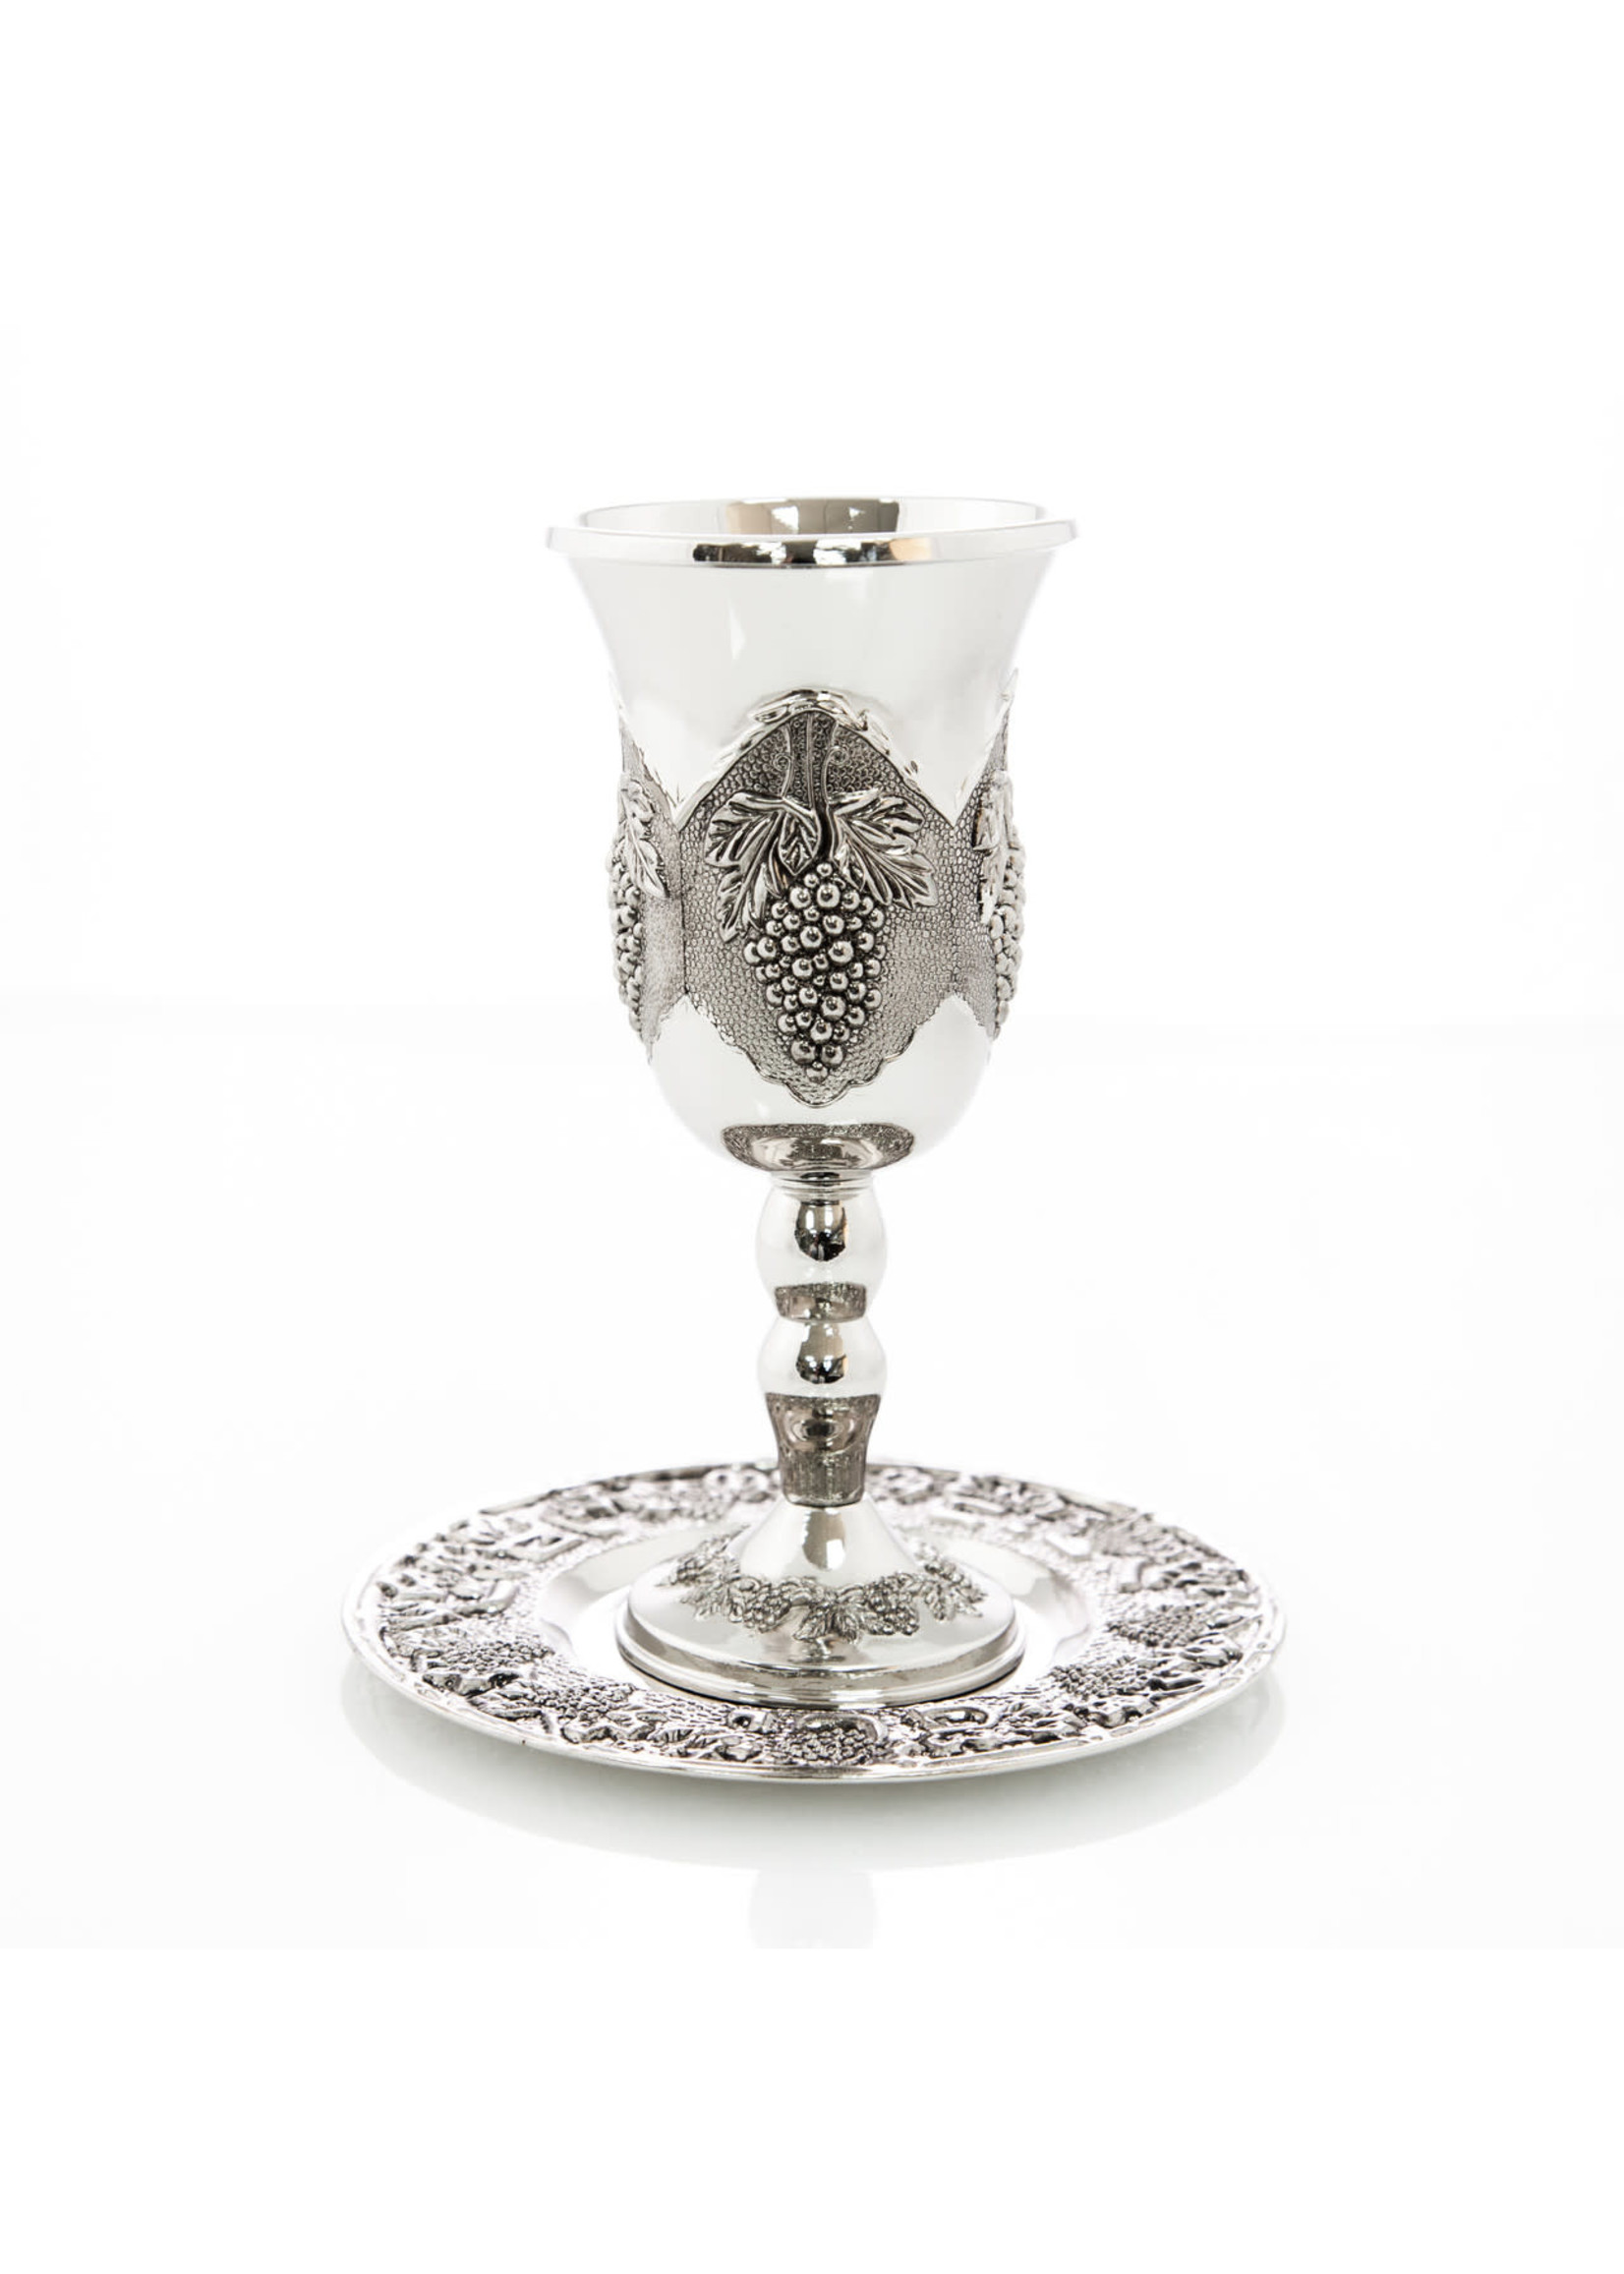 ELIJAH CUP SILVER PLATED - GRAPES  9 INCH